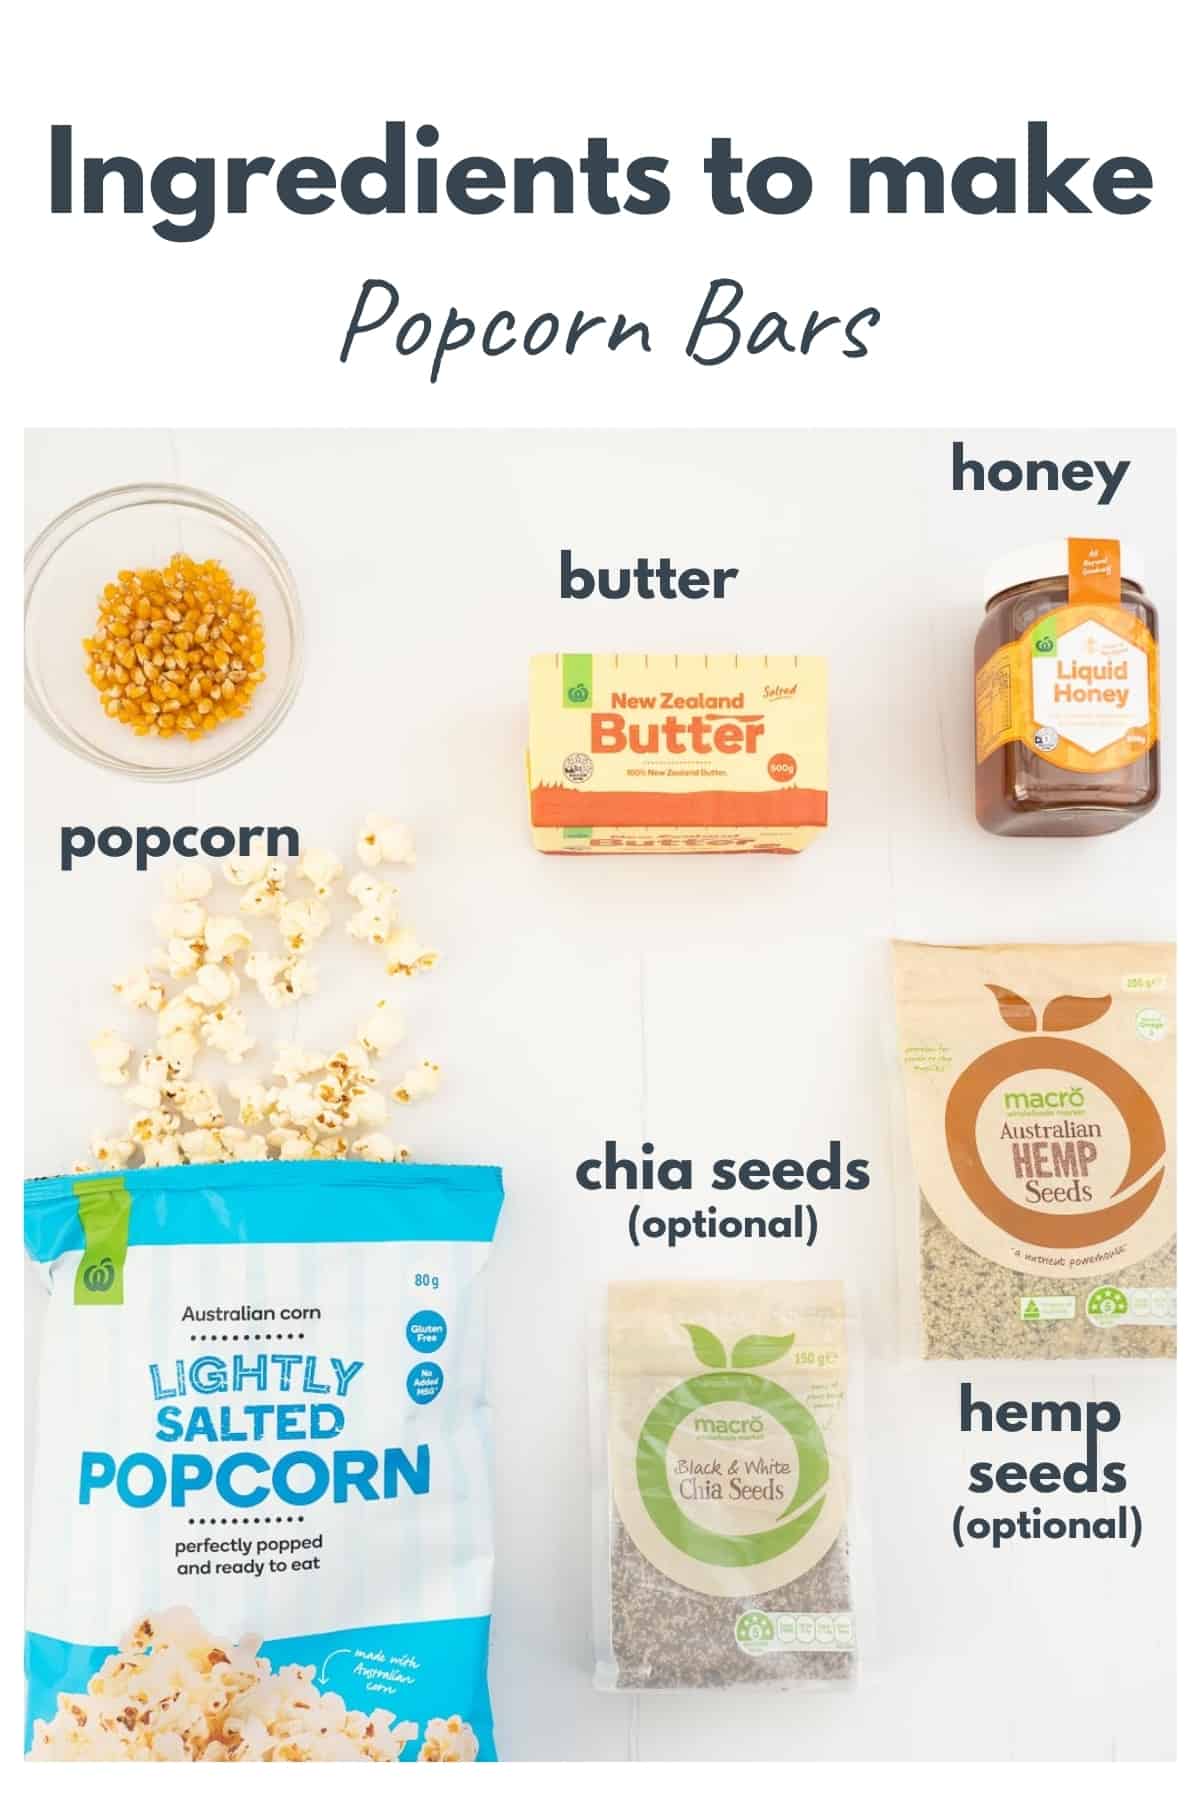 Ingredients to make popcorn bars laid out on a bench top with text overlay.